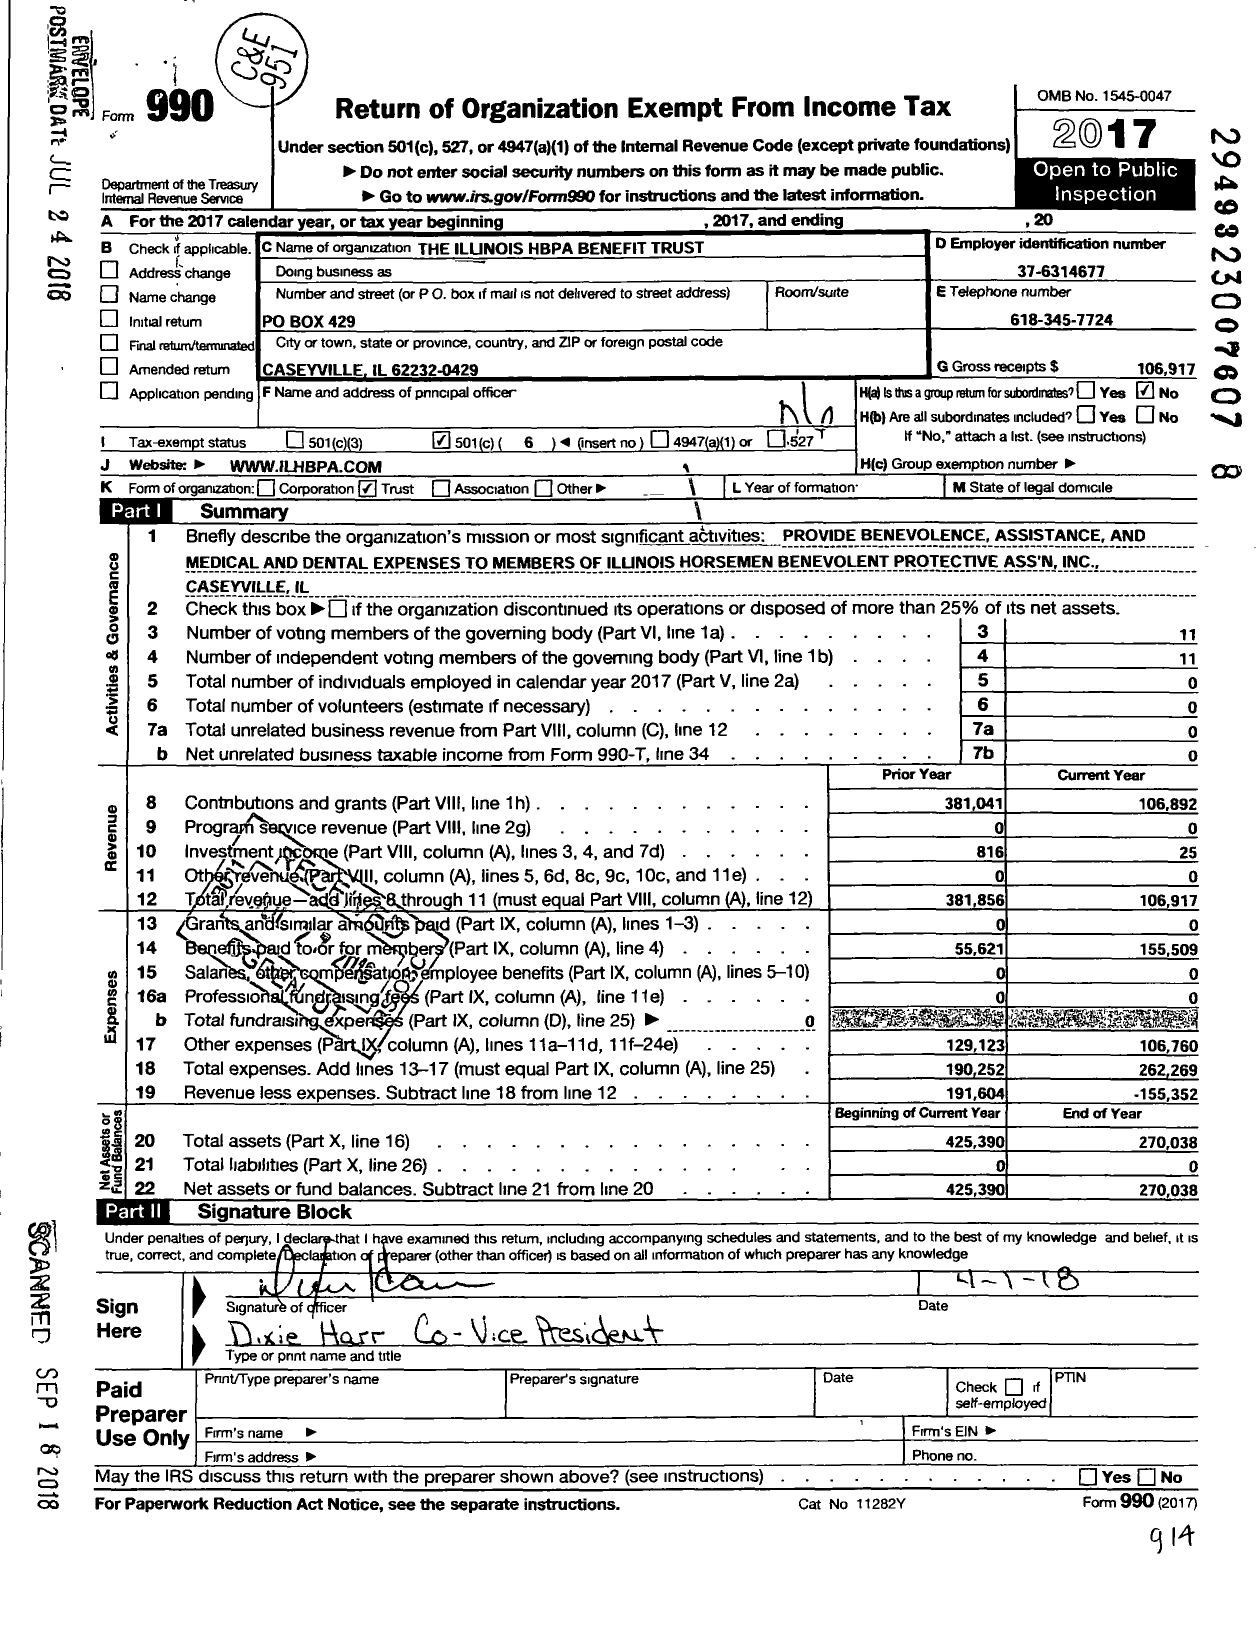 Image of first page of 2017 Form 990O for The Illinois Hbpa Benefit Trust